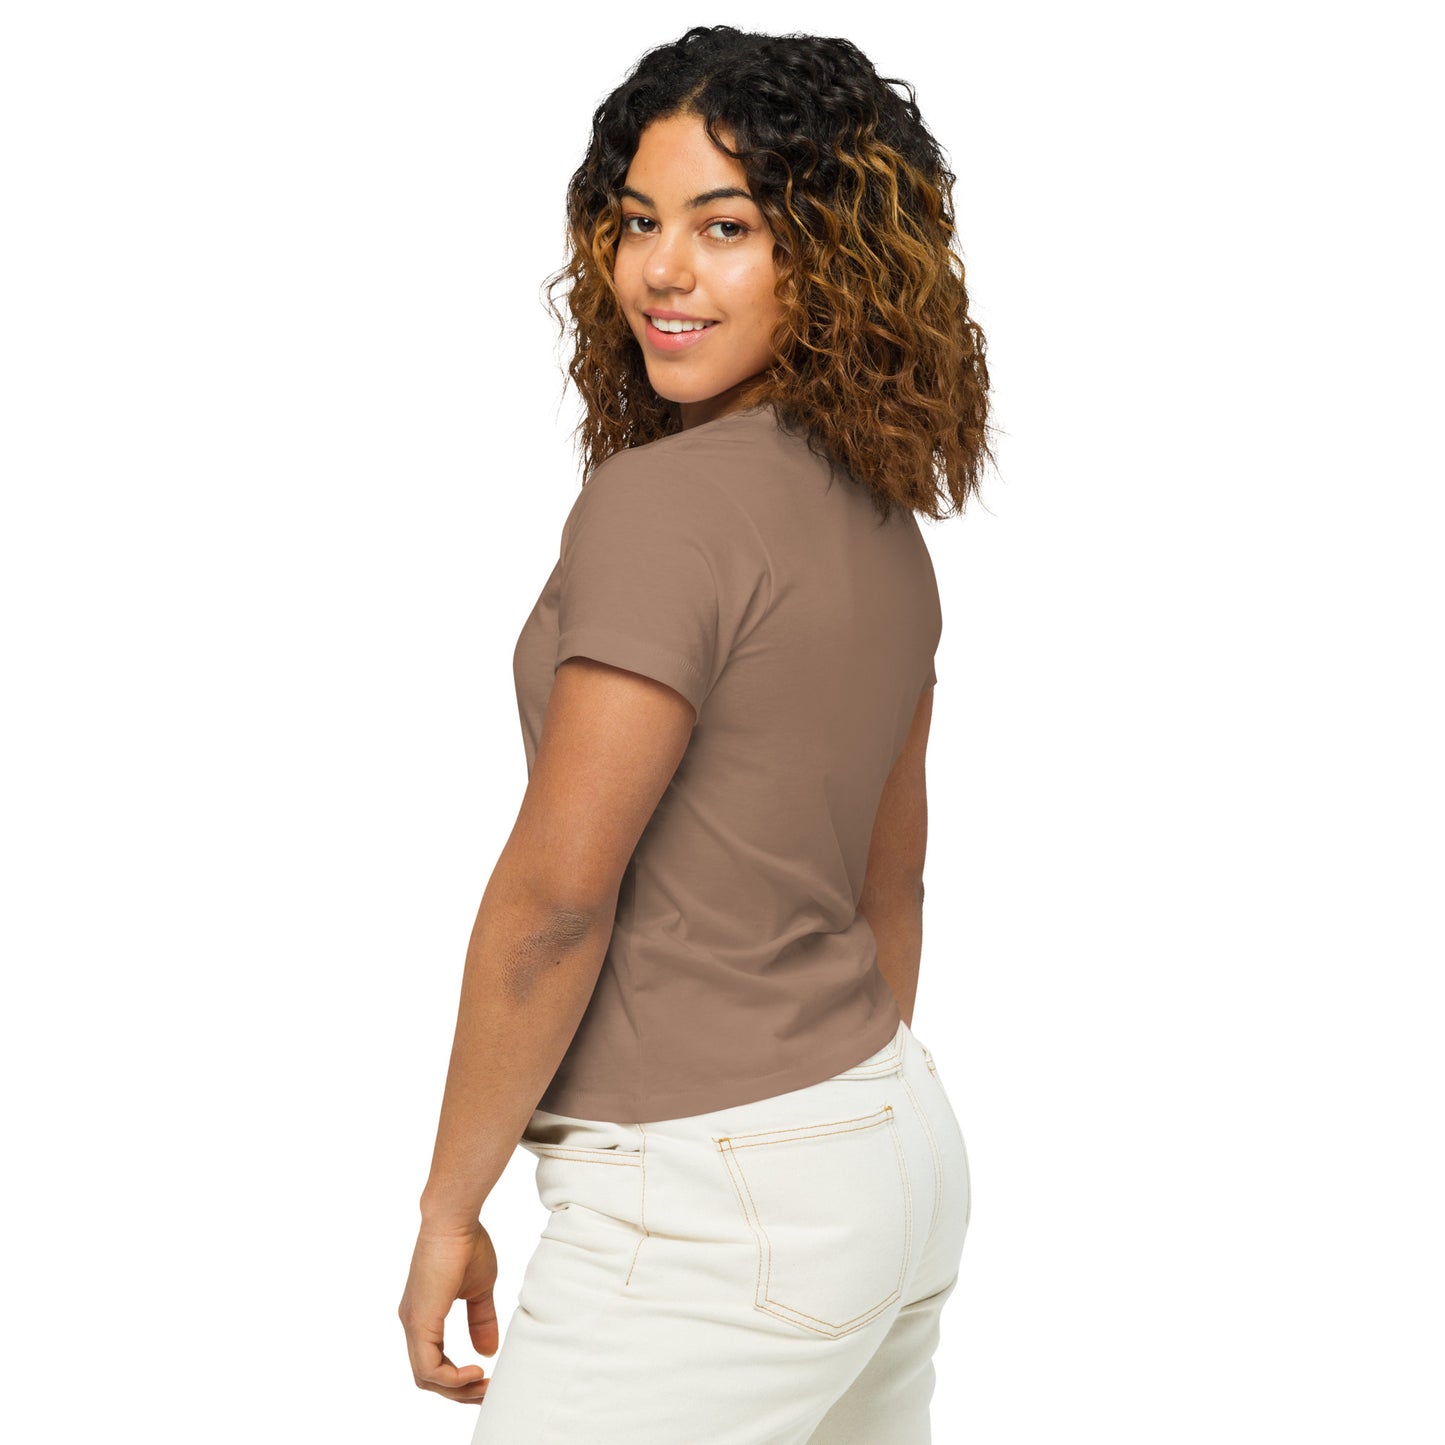 Main Streets Are For Everyone (White) Women’s High-Waisted T-shirt